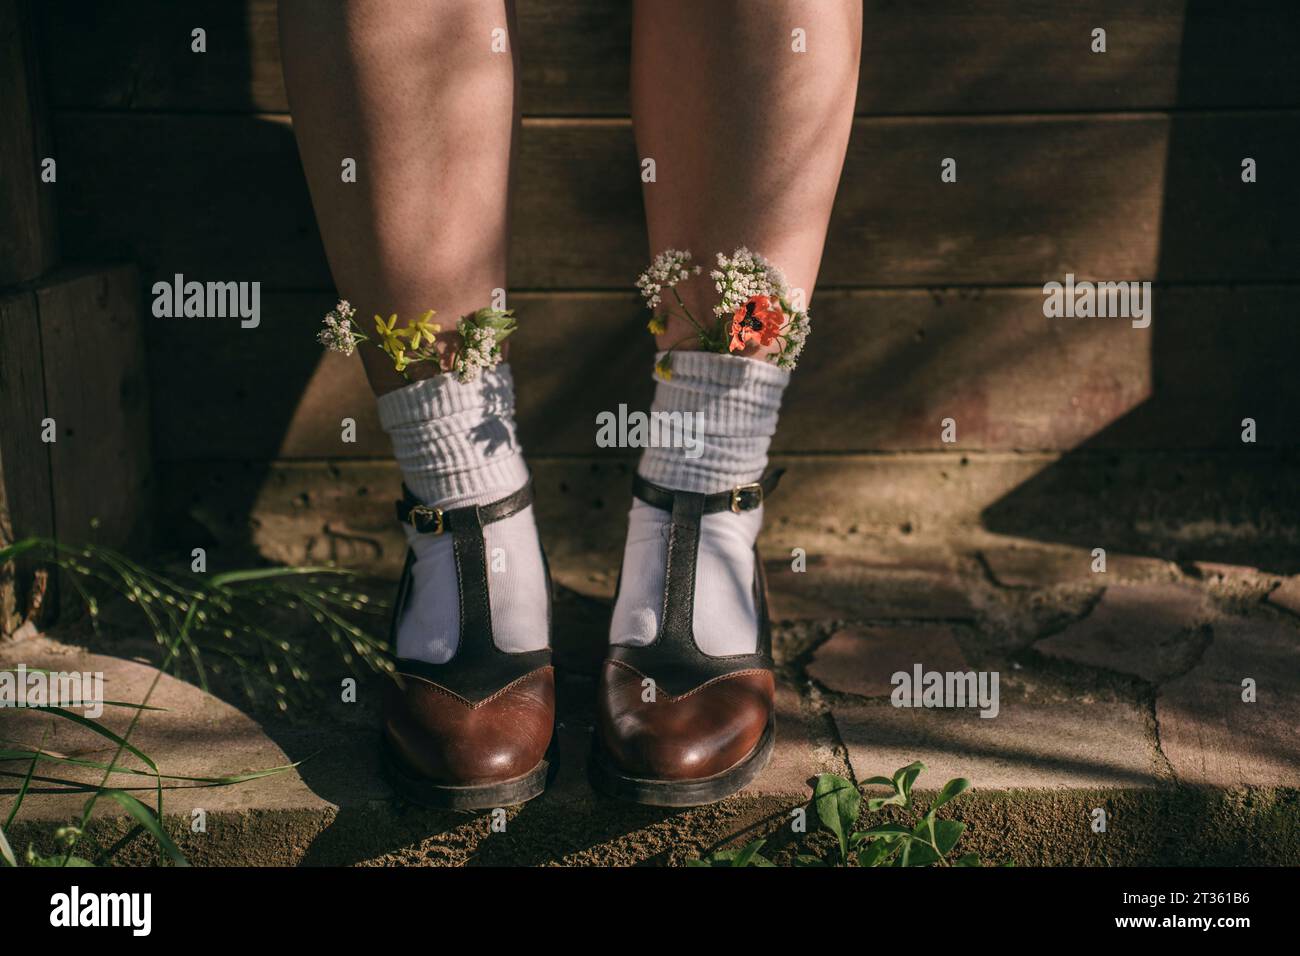 Woman wearing vintage shoes with wildflowers in white socks Stock Photo